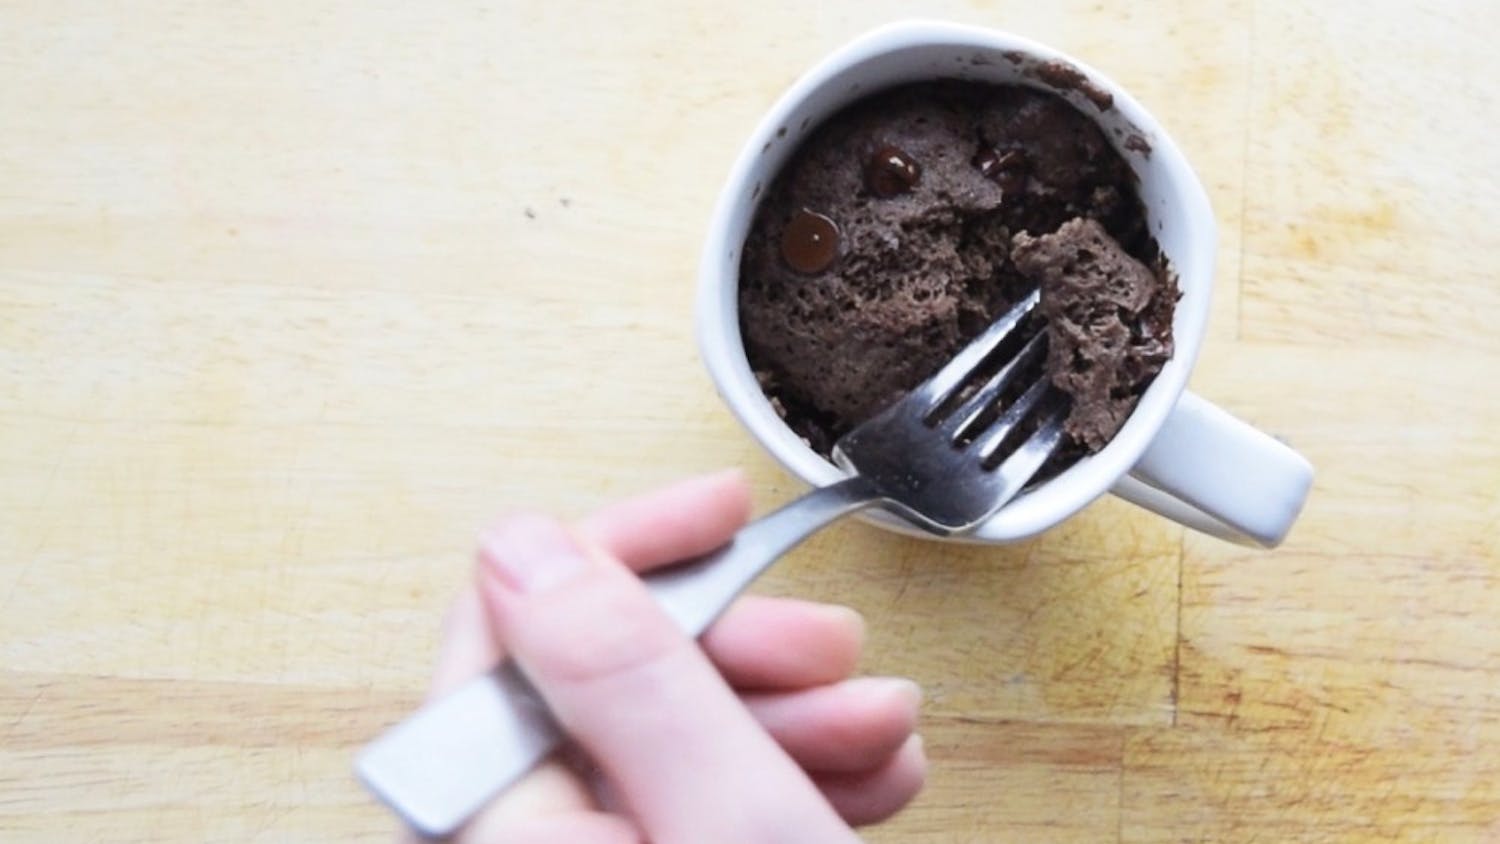 Chocolate cake in a mug is an easy way to fulfill any chocolate cravings. It only needs four ingredients and can be prepared in your residence hall.